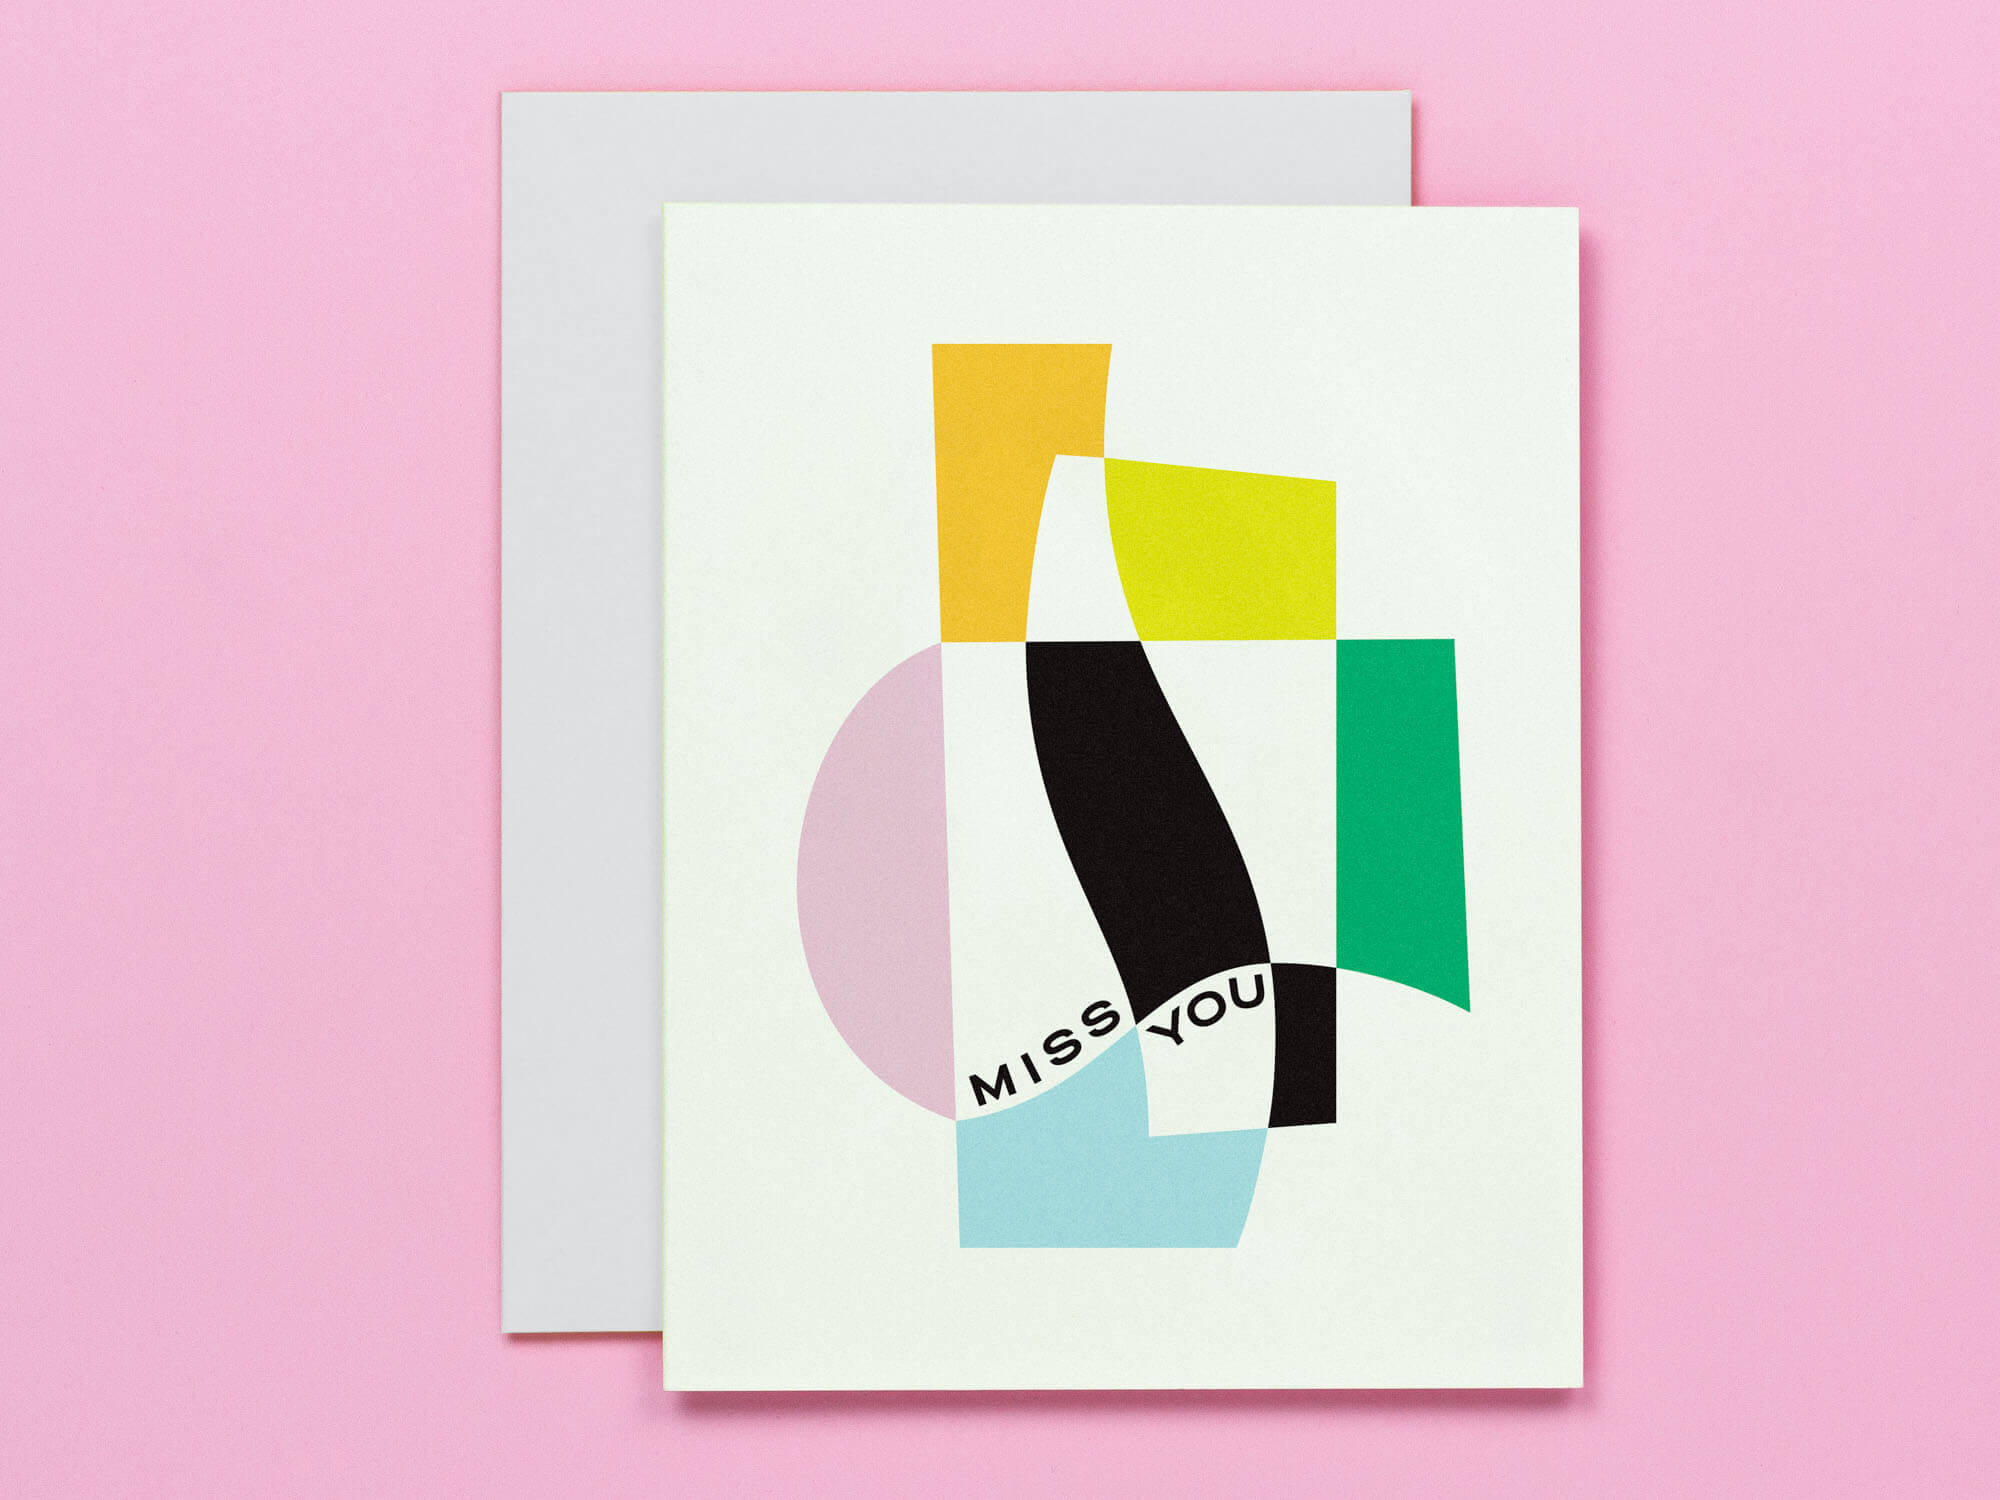 Miss you card designed with minimal abstract shapes composition in pastel hues with black and white accents. Vaguely Kandinsky-inspired. Made in USA by My Darlin' @mydarlin_bk